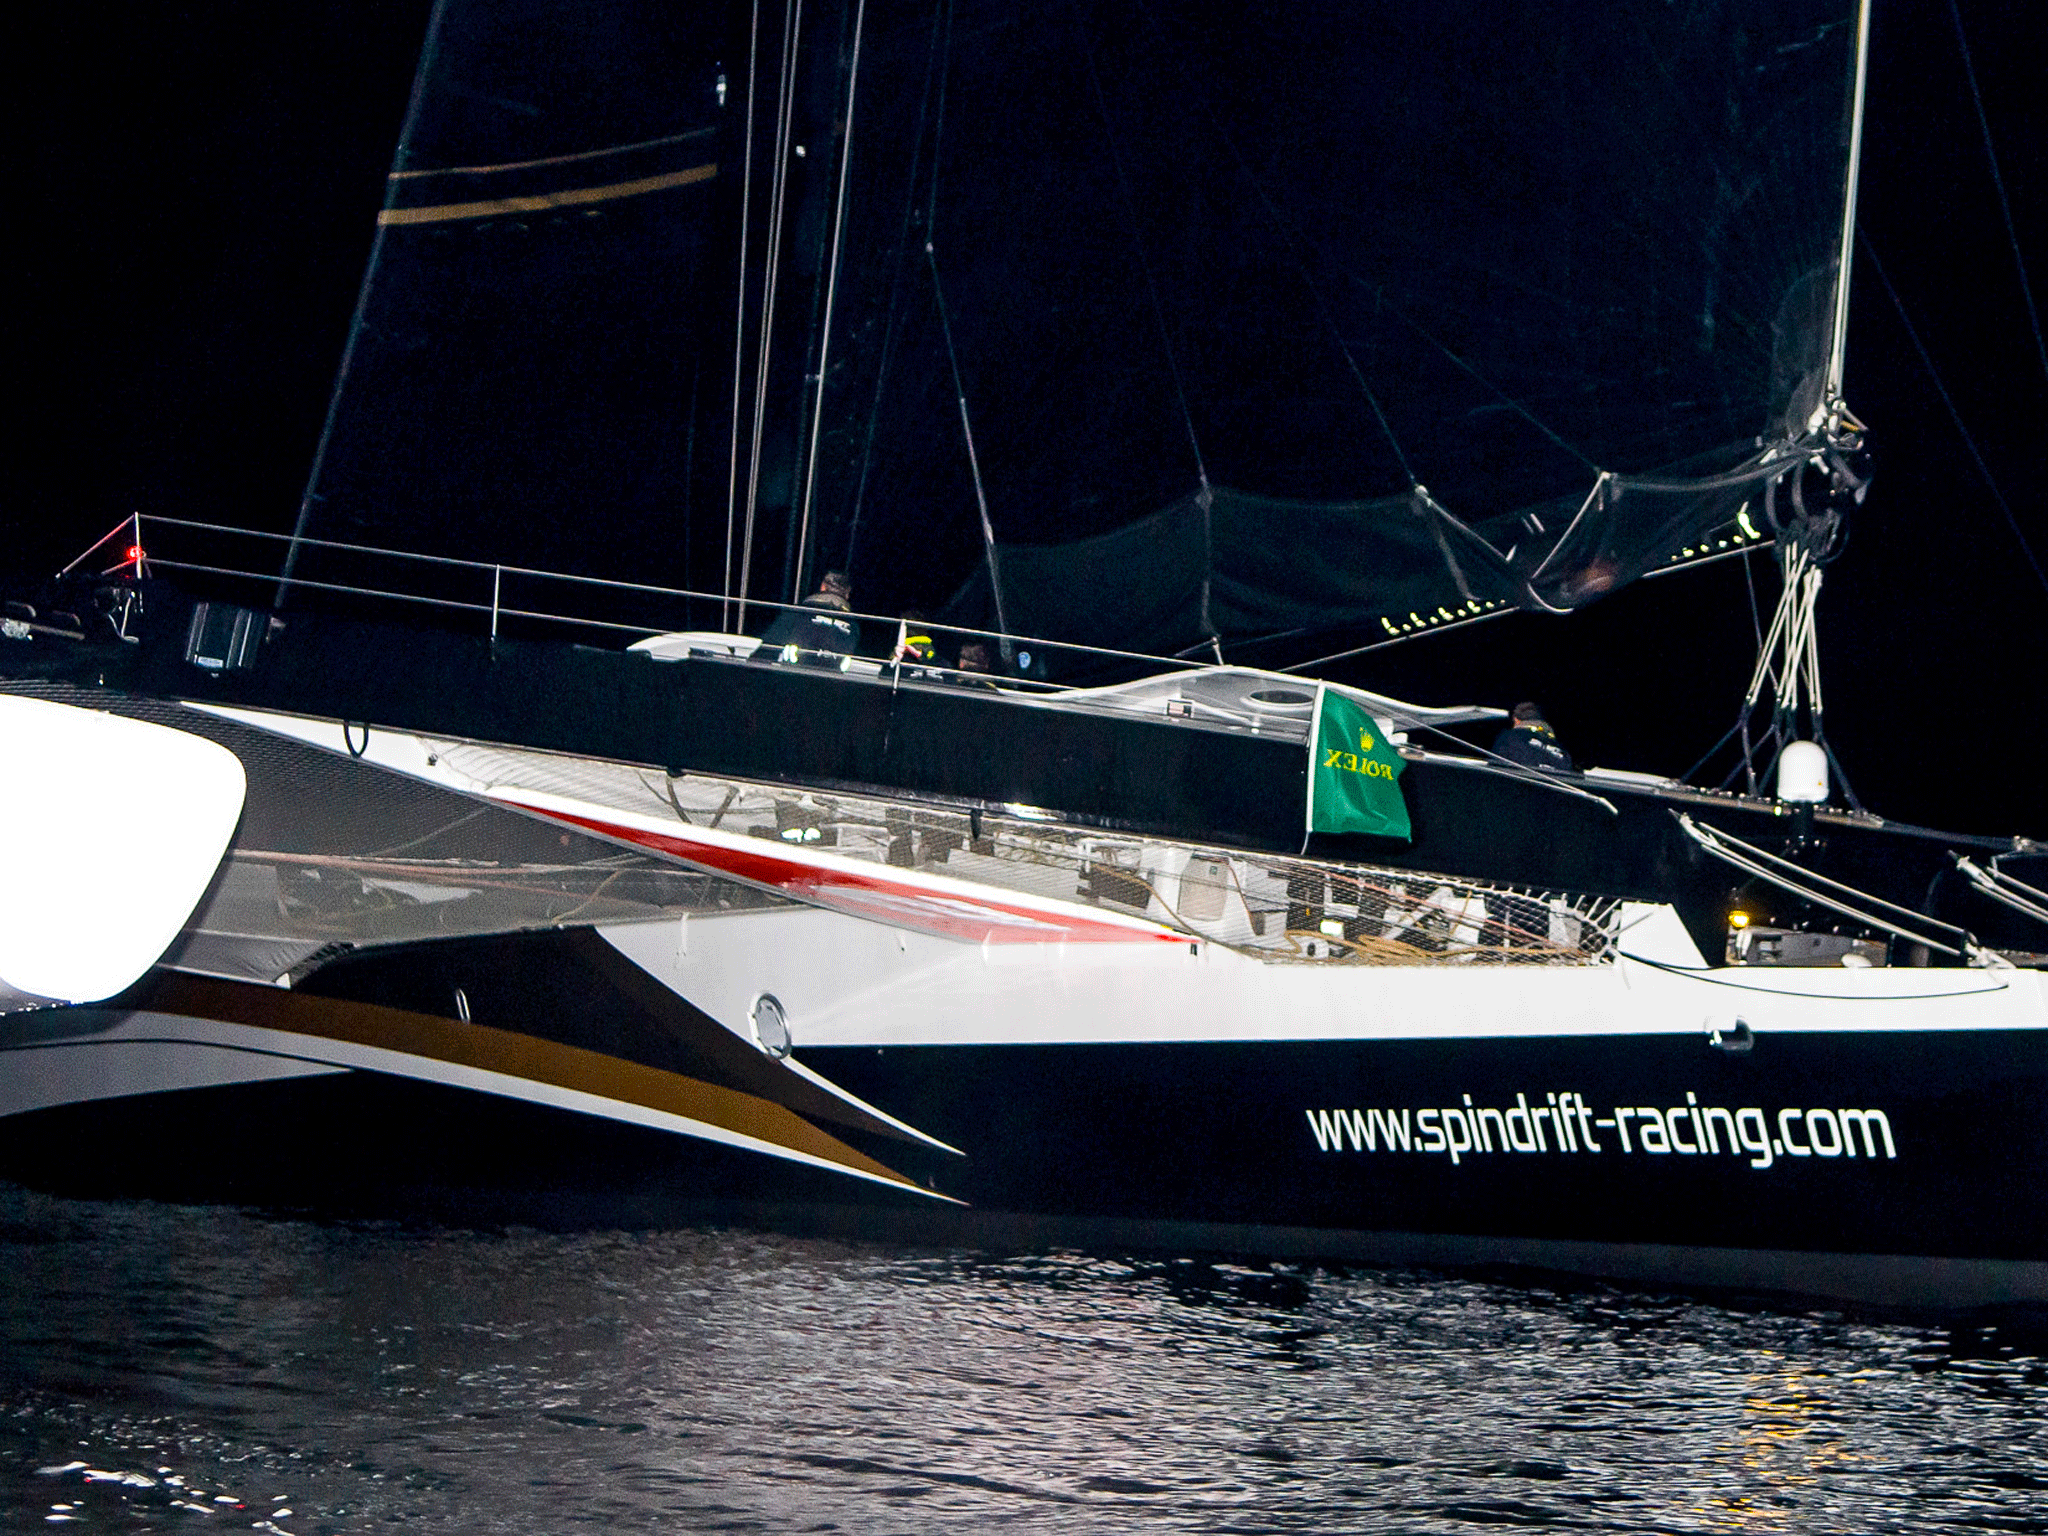 First home. The Swiss-owned 131-foot trimaran Spindrift, co-skippered by Dona Bertarelli and Yann Guichard, ghosts across the finish line off the breakwater in Plymouth having completed the 611-mile Rolex Fastnet Race from Cowes in 38hr 53min 58sec.